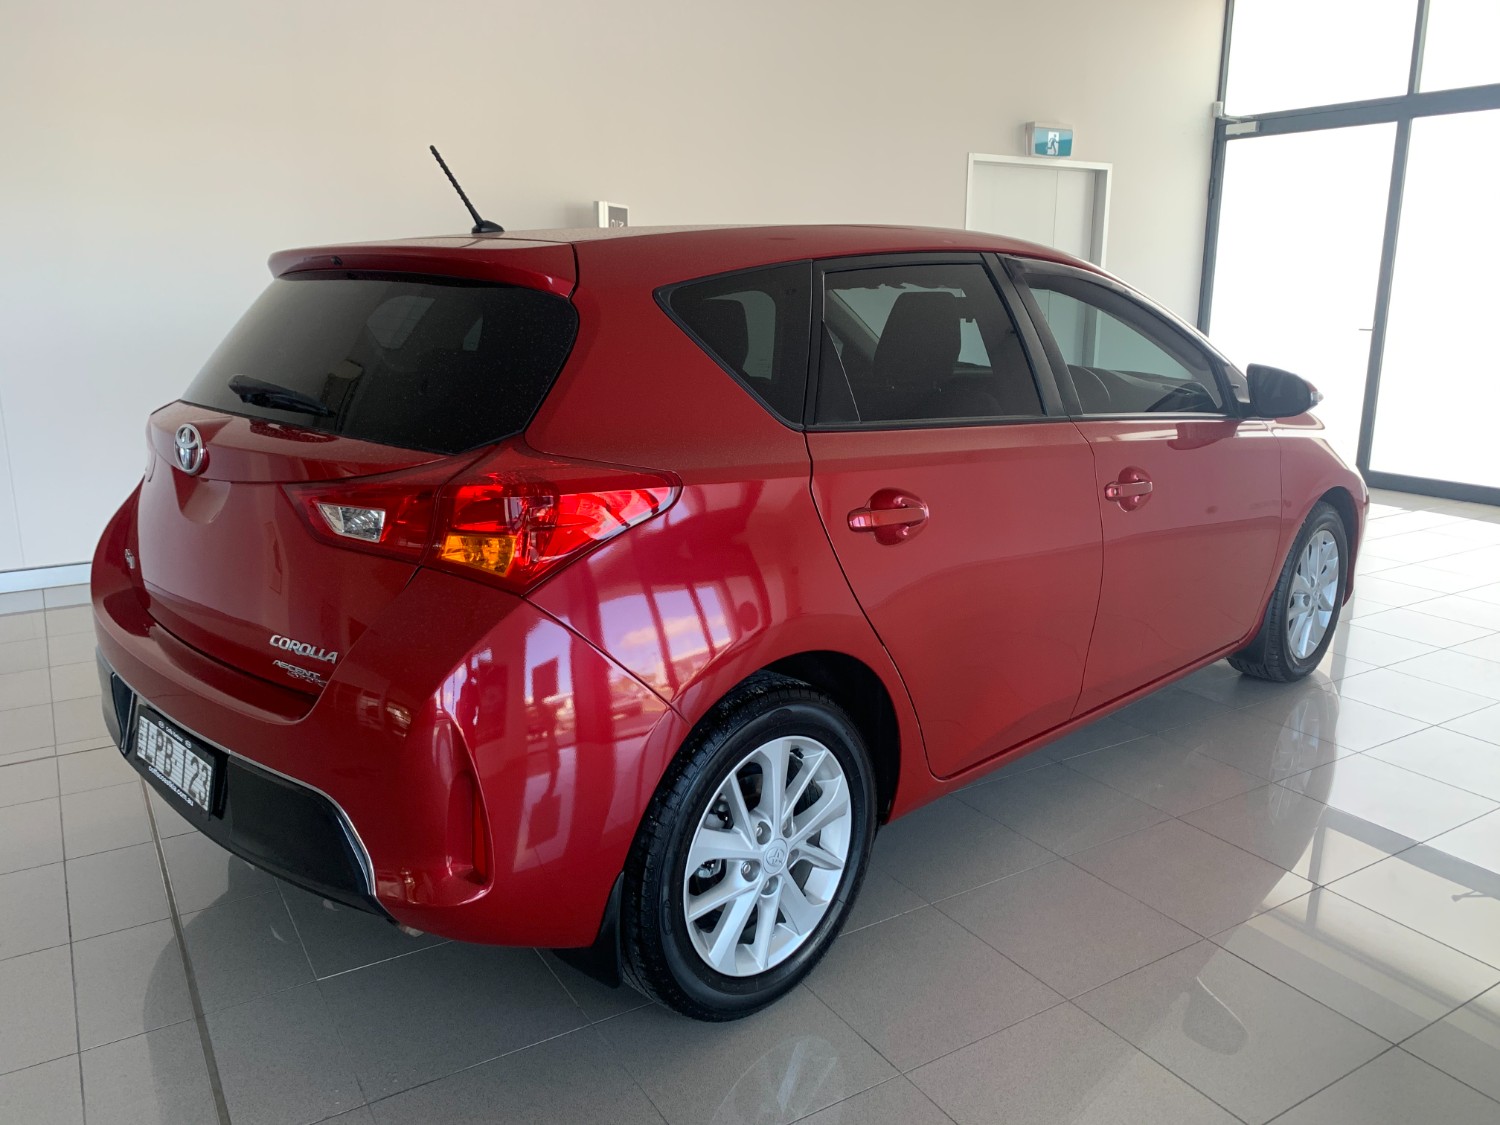 2014 Toyota Corolla ZRE182R Ascent Sport Hatch Image 12